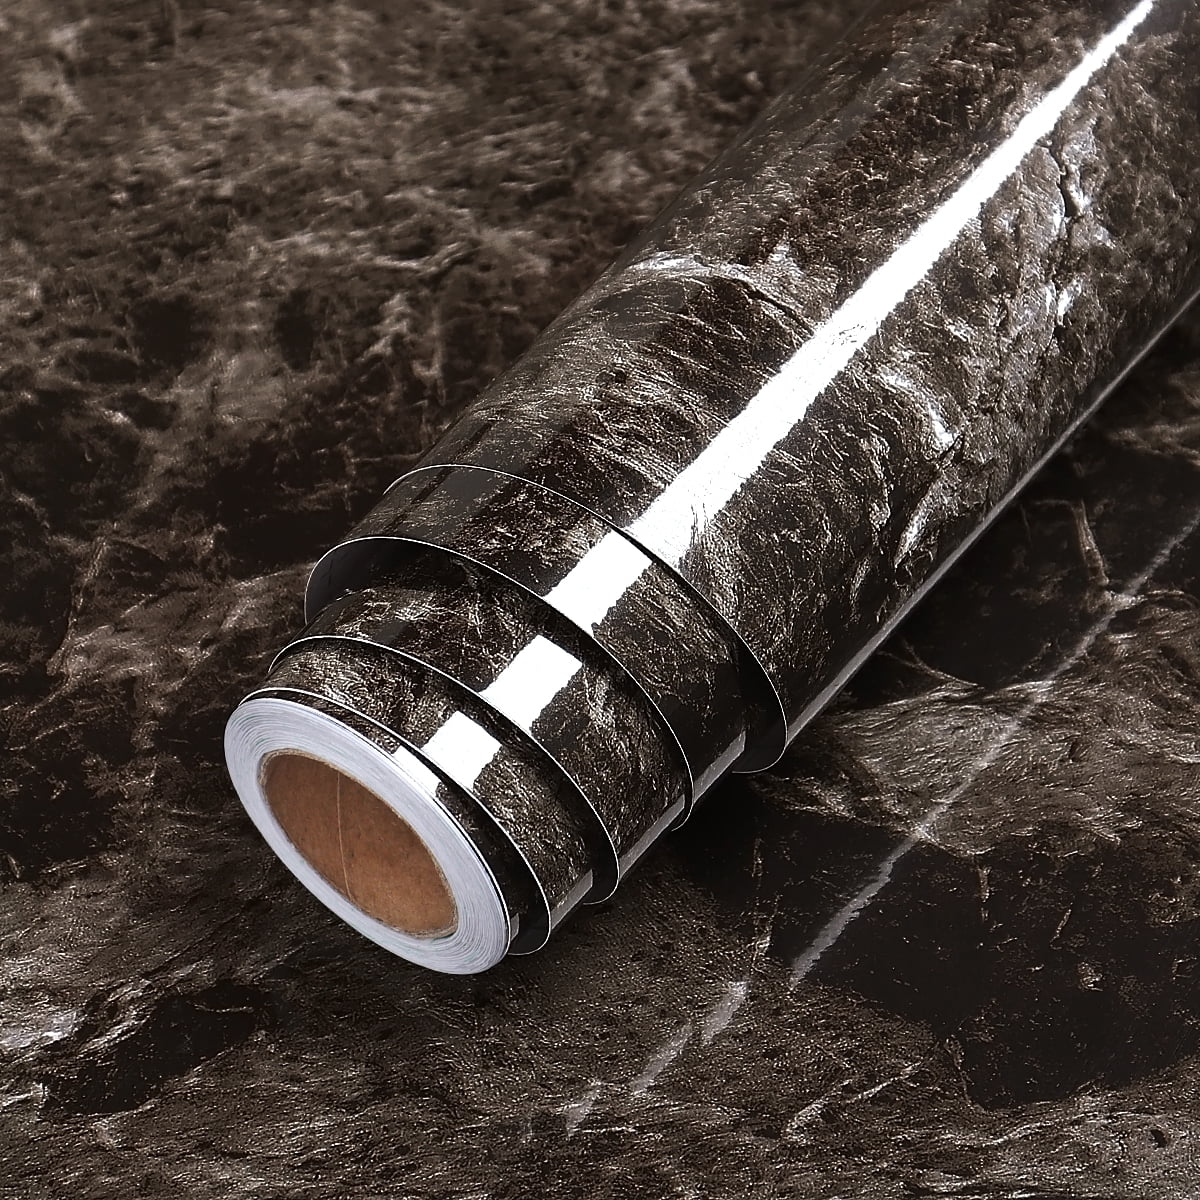 LaCheery Dark Brown Marble Contact Paper 30cm x 4m Waterproof Decorative Marble Self Adhesive Paper Kitchen Countertop Peel and Stick Wallpaper for Cabinets Backsplash Shelf Liner Counter Top Covers